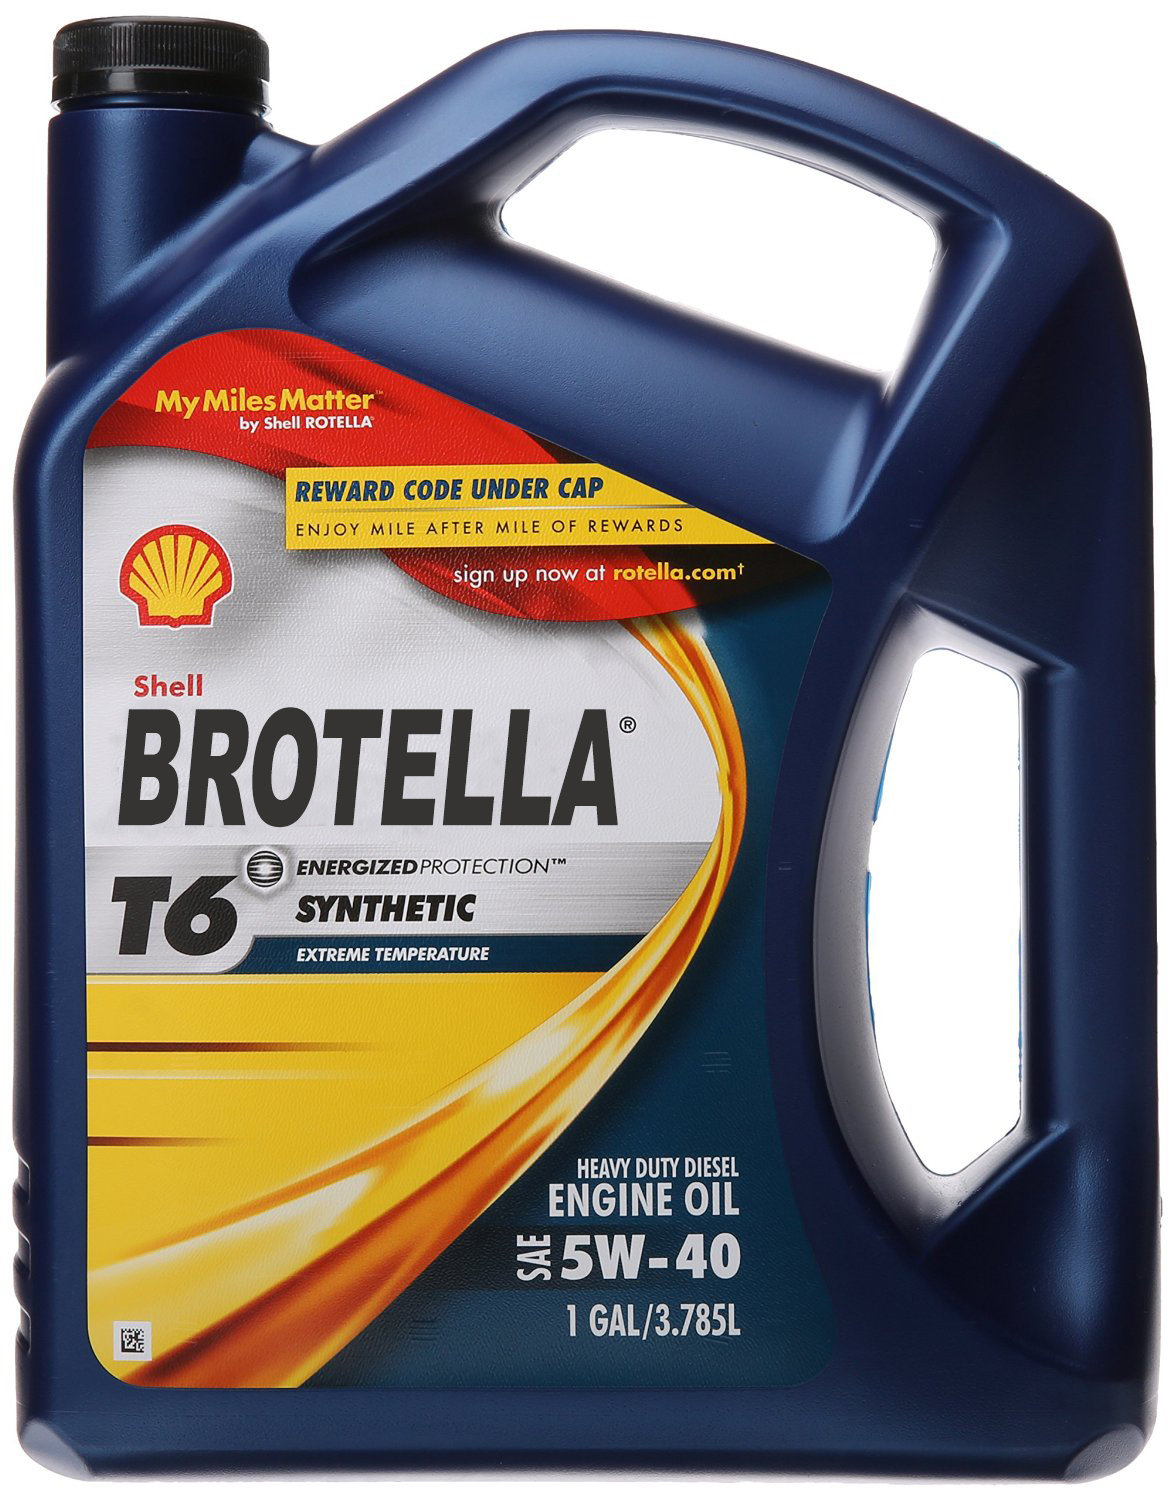 rotella-gas-truck-synthetic-10-rebate-11-57-5-qts-vw-vortex